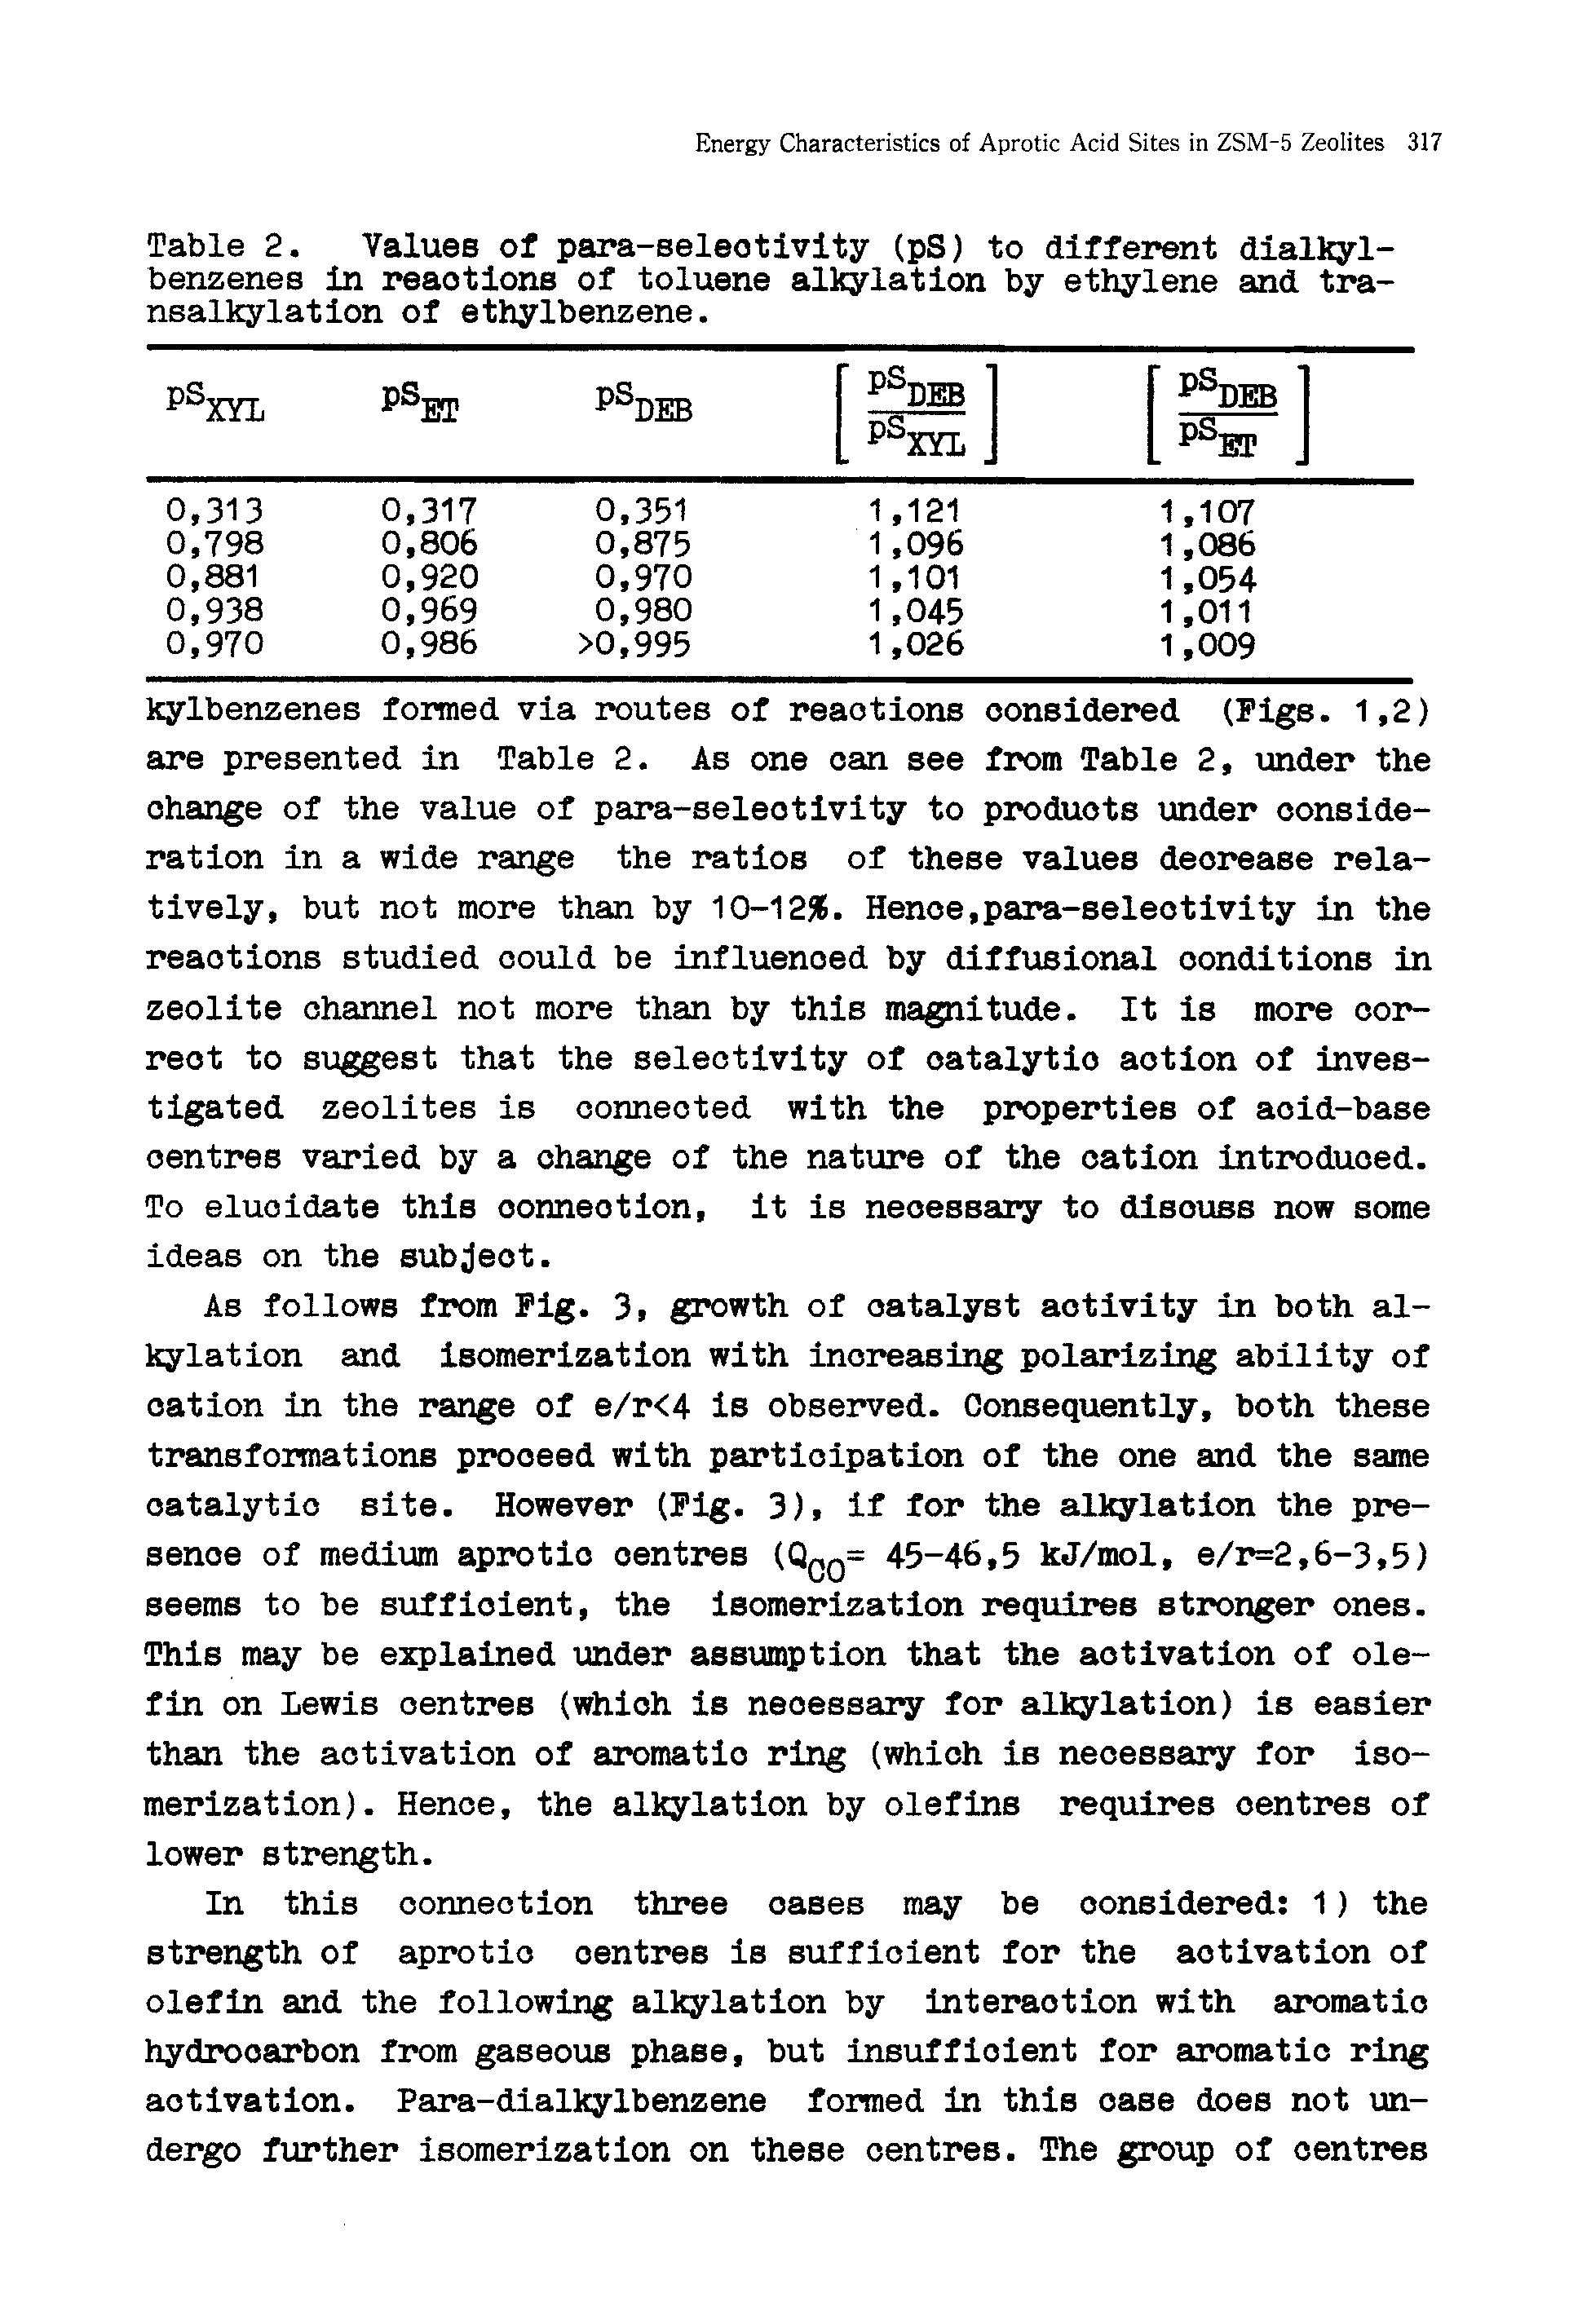 Table 2. Values of para-seleotivlty (pS) to different dialkyl-benzenes in reactions of toluene alkylation by ethylene and transalkylation of ethylbenzene.